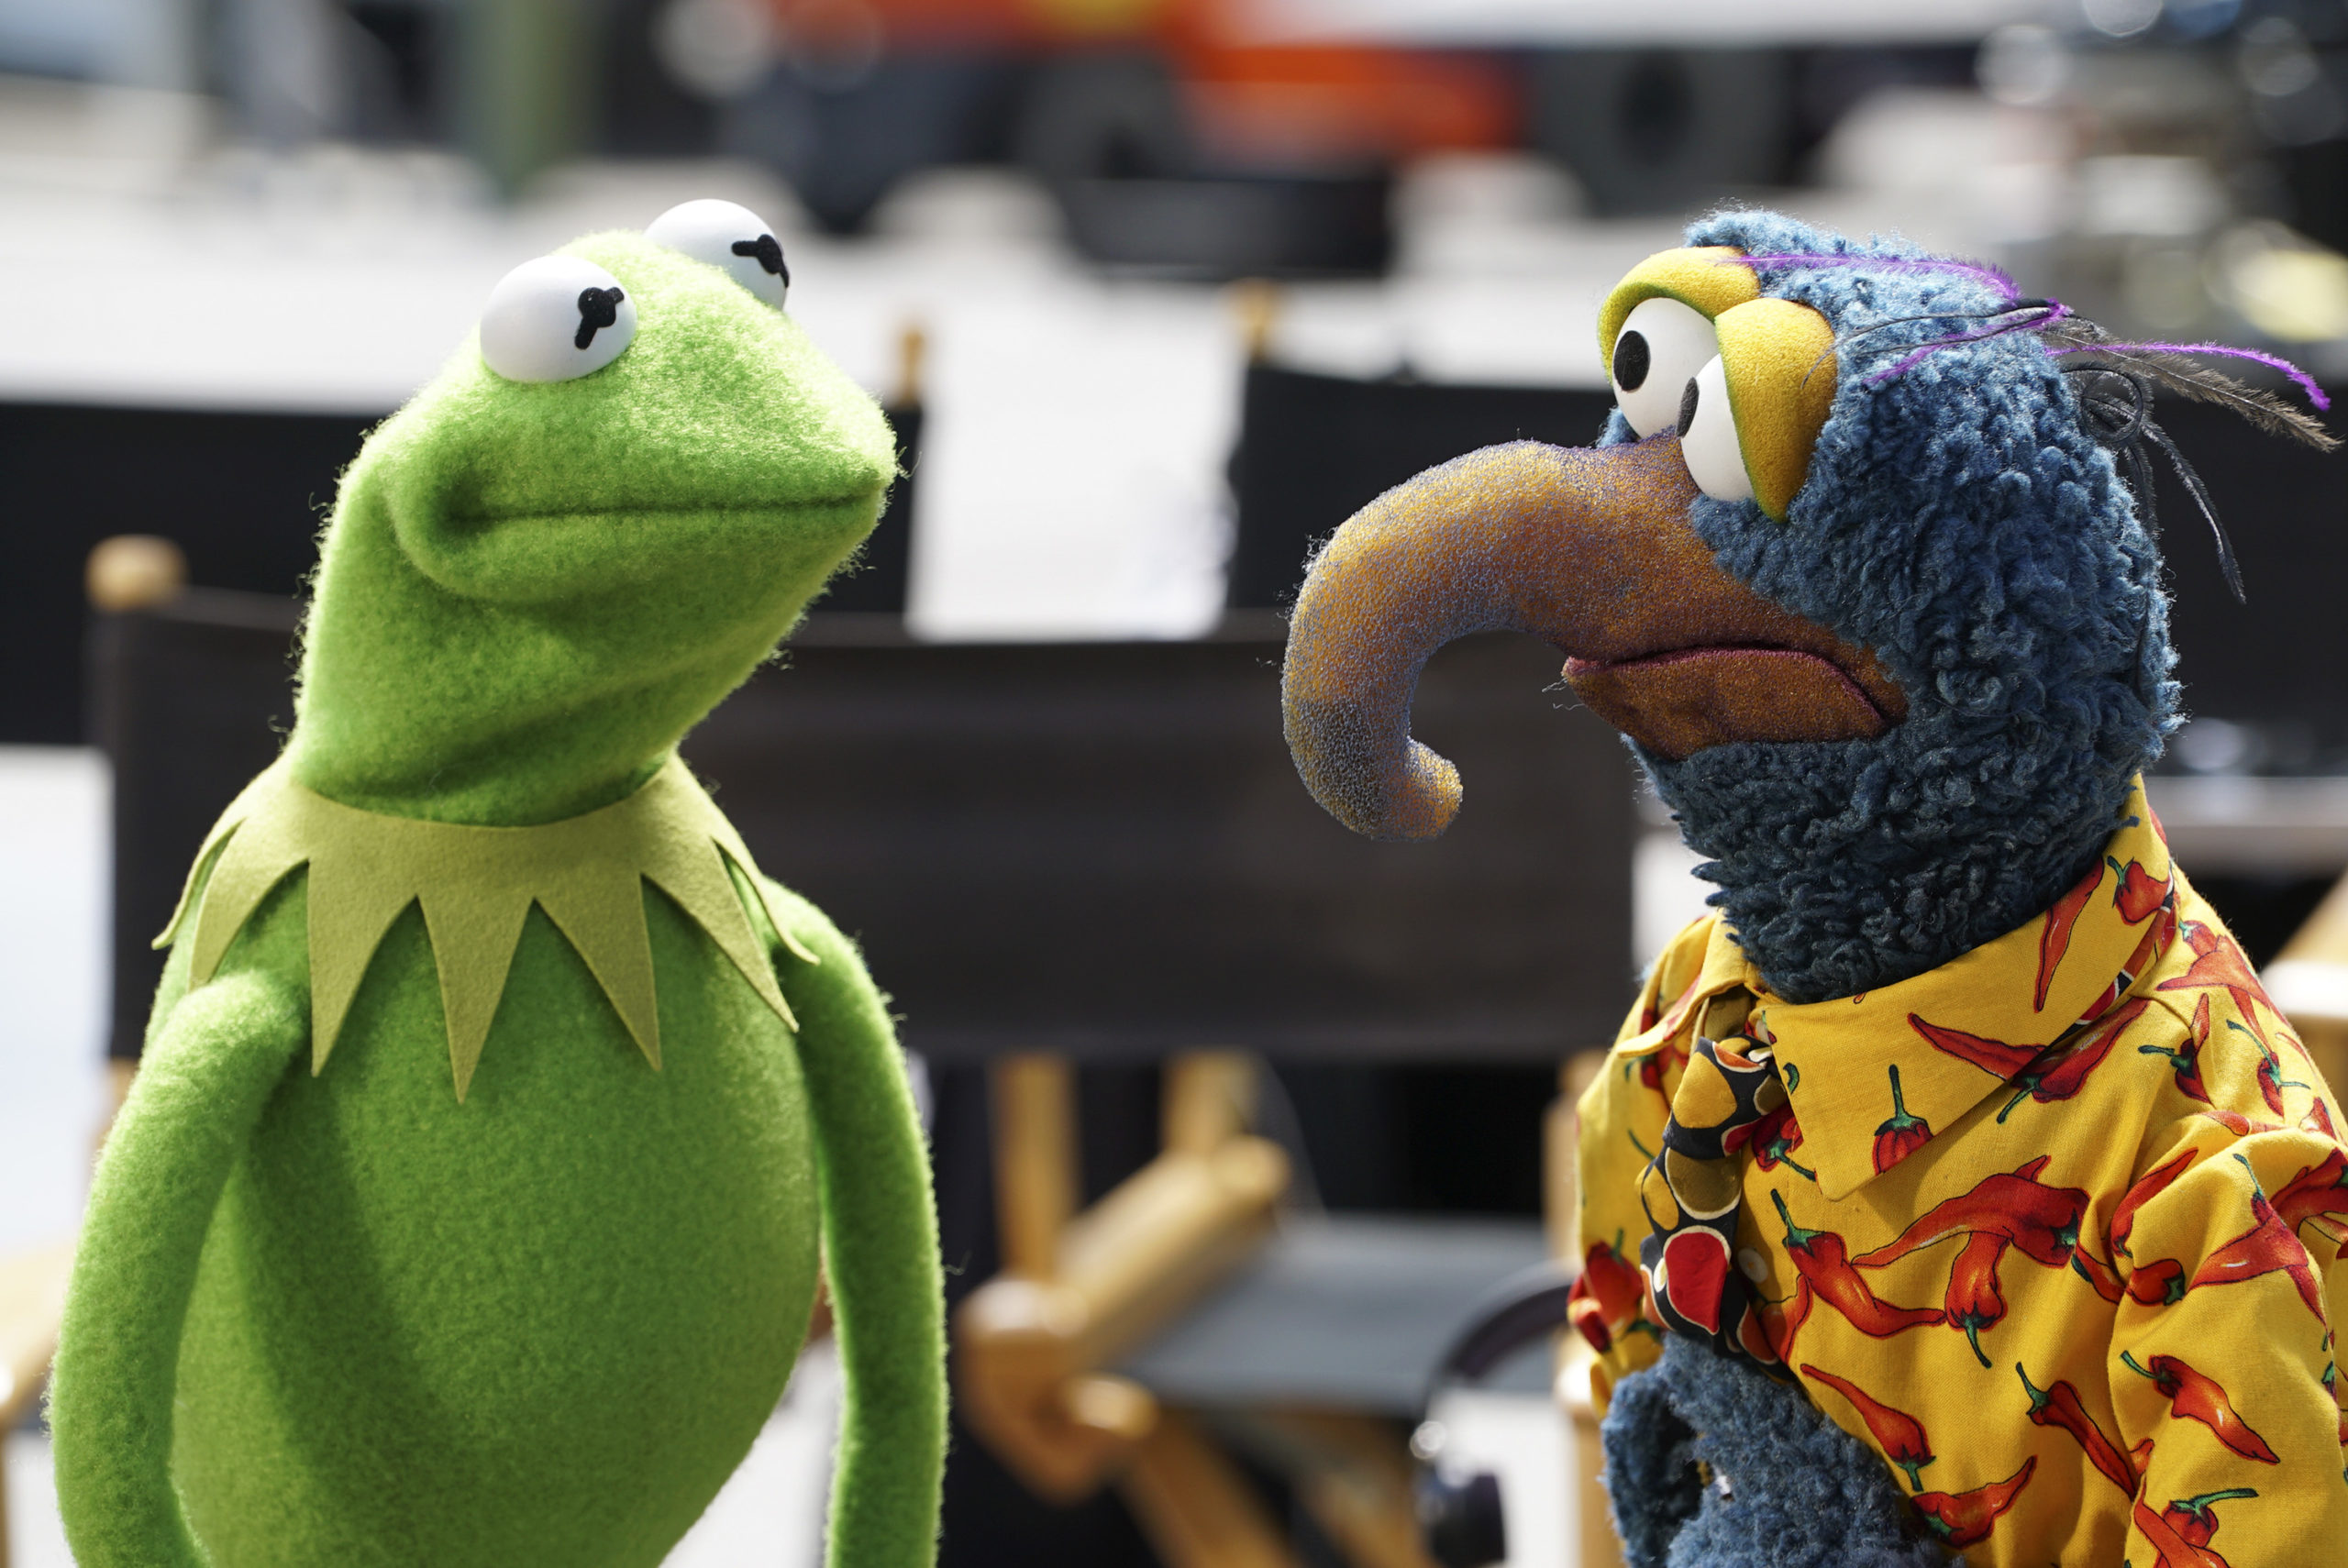 KERMIT THE FROG, GONZO THE GREAT